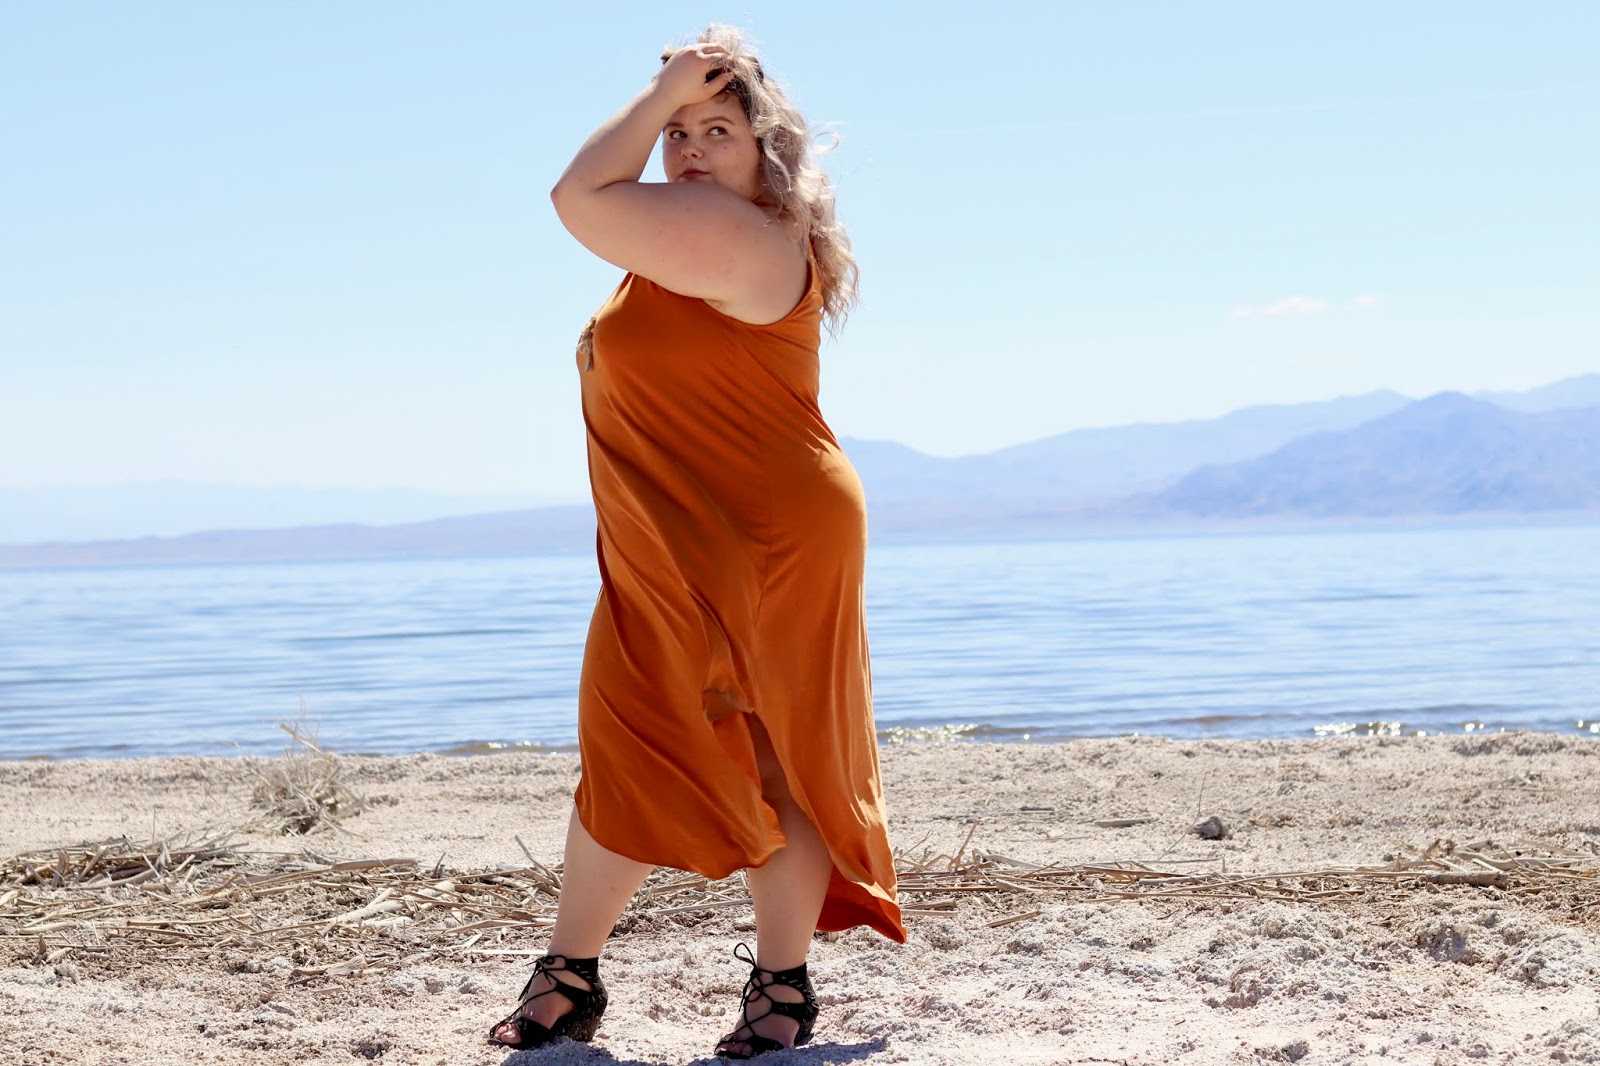 Chicago Plus Size Petite Fashion Blogger, YouTuber, and model Natalie Craig, of Natalie in the City, reviews Fashion Nova Curve's maxi dresses and visits palm springs and the salton sea.